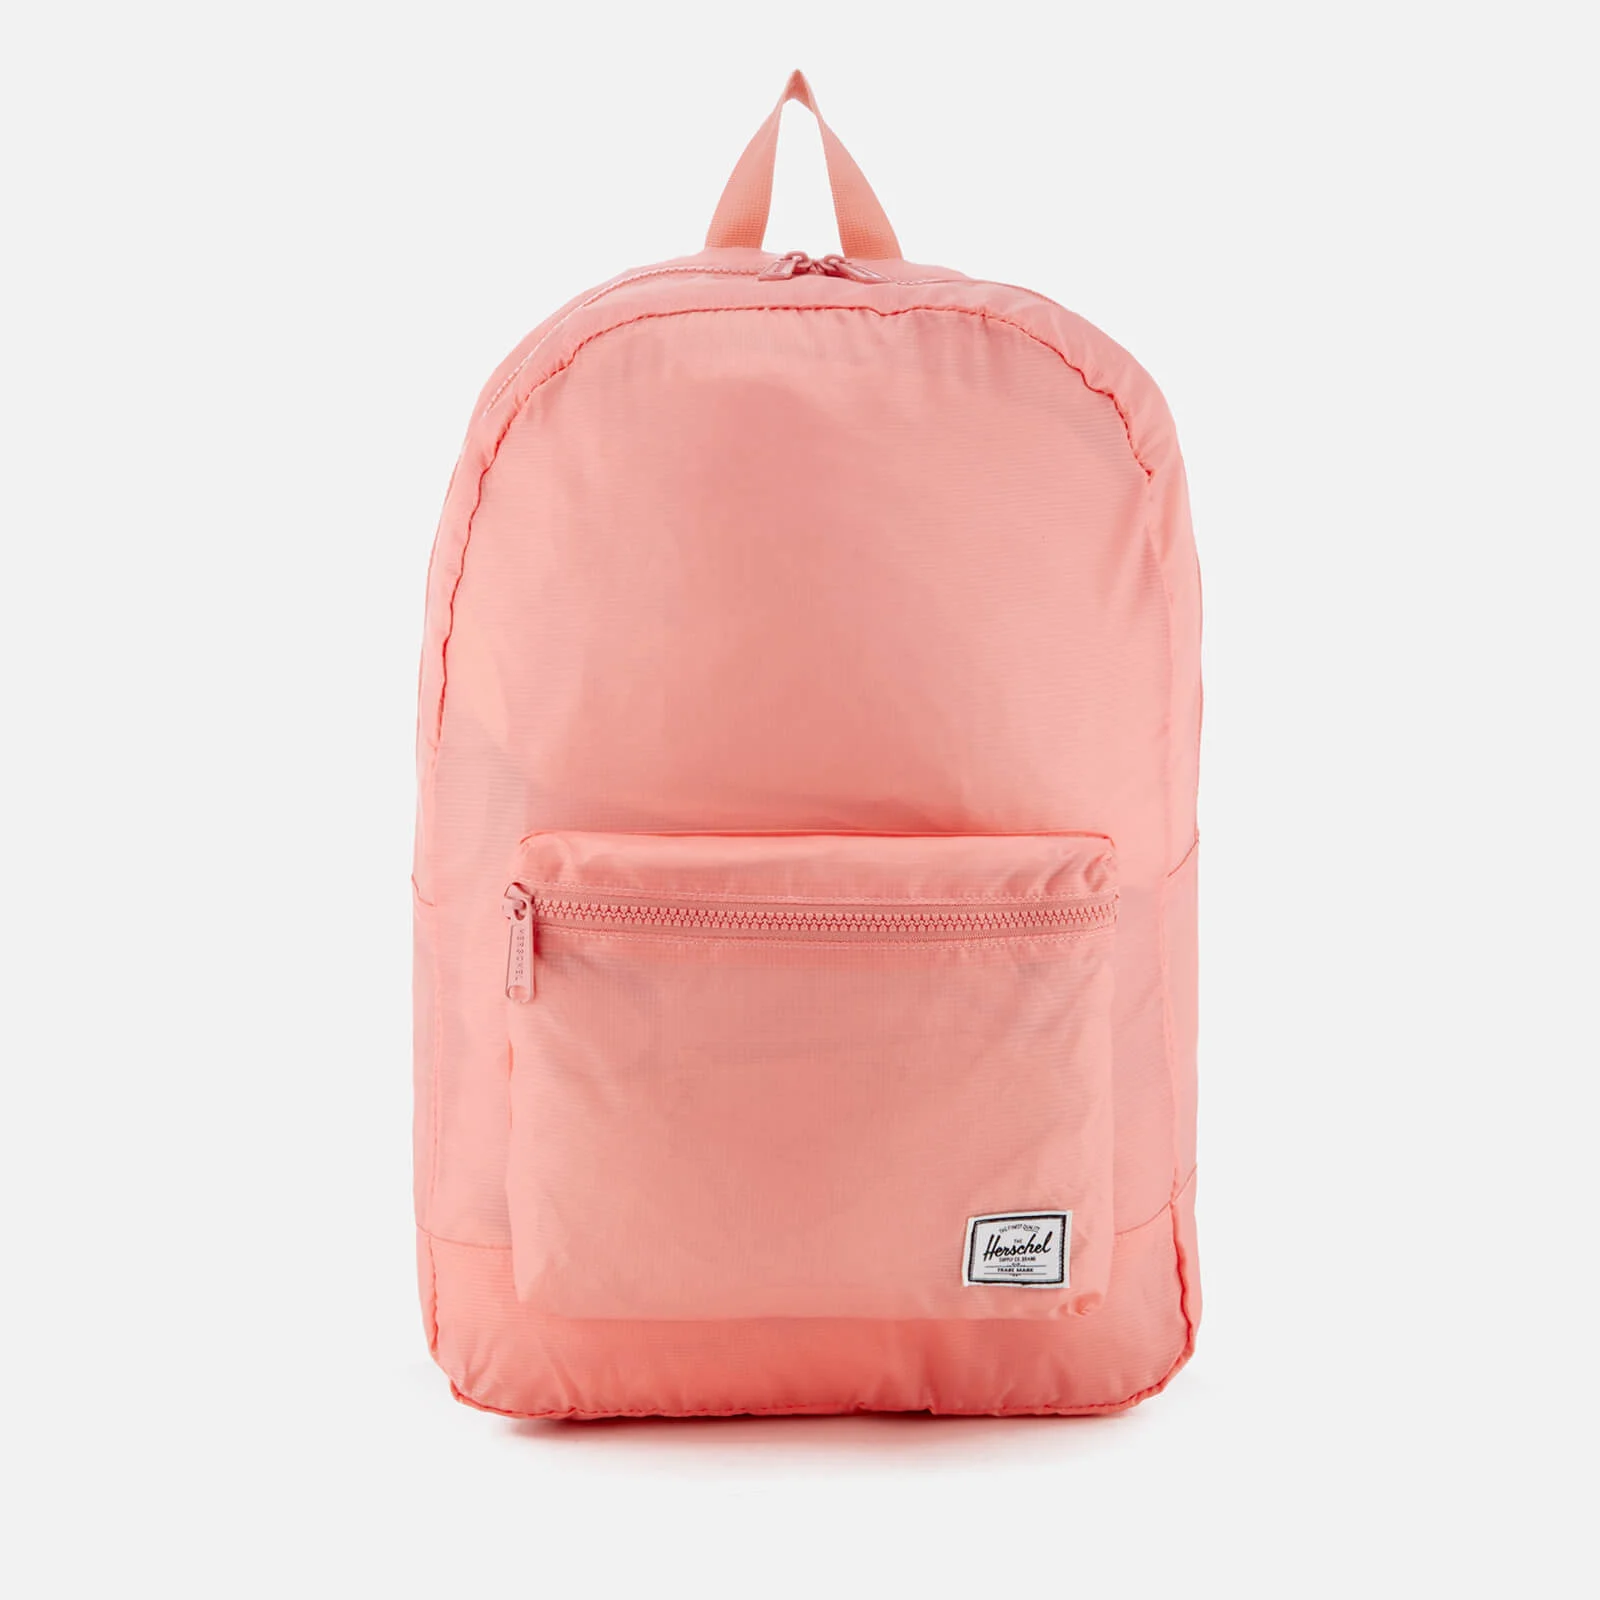 Herschel Supply Co. Packable Daypack - Strawberry Ice Image 1